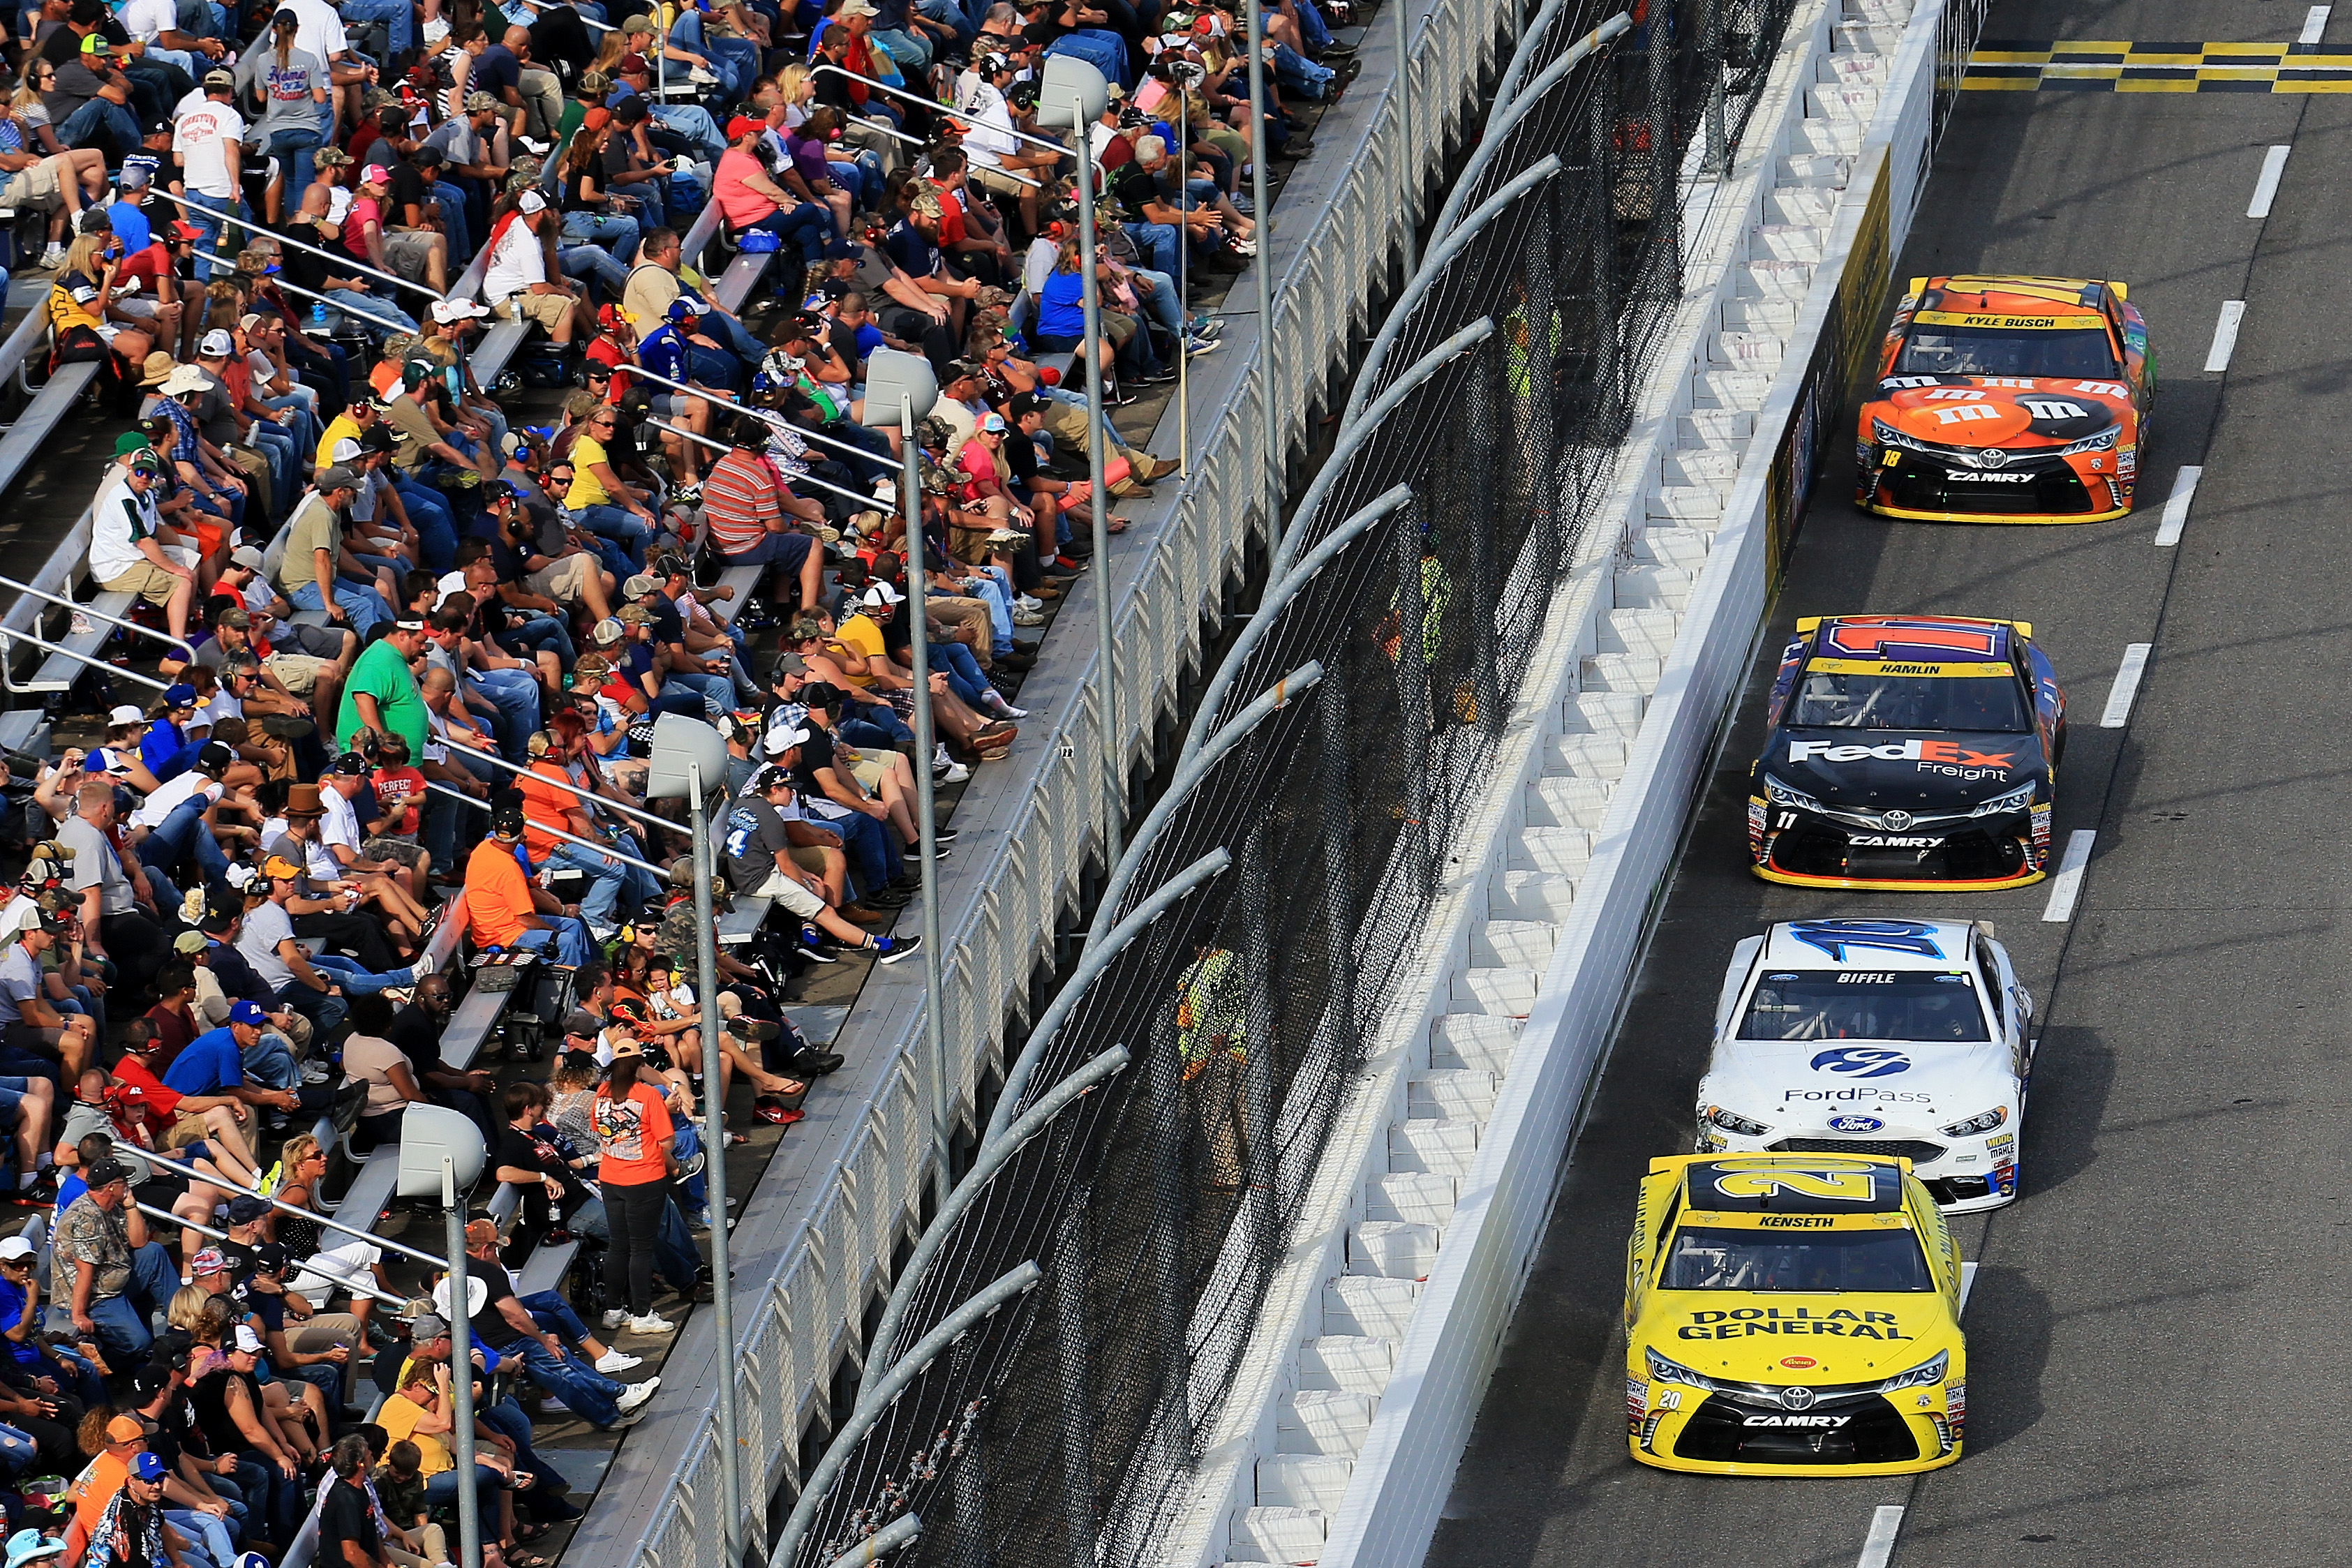 A pack of cars race during the NASCAR Sprint Cup Series Goody's Fast Relief 500 on October 30, 2016 in Martinsville, Virginia. (Daniel Shirey&mdash;Getty Images)